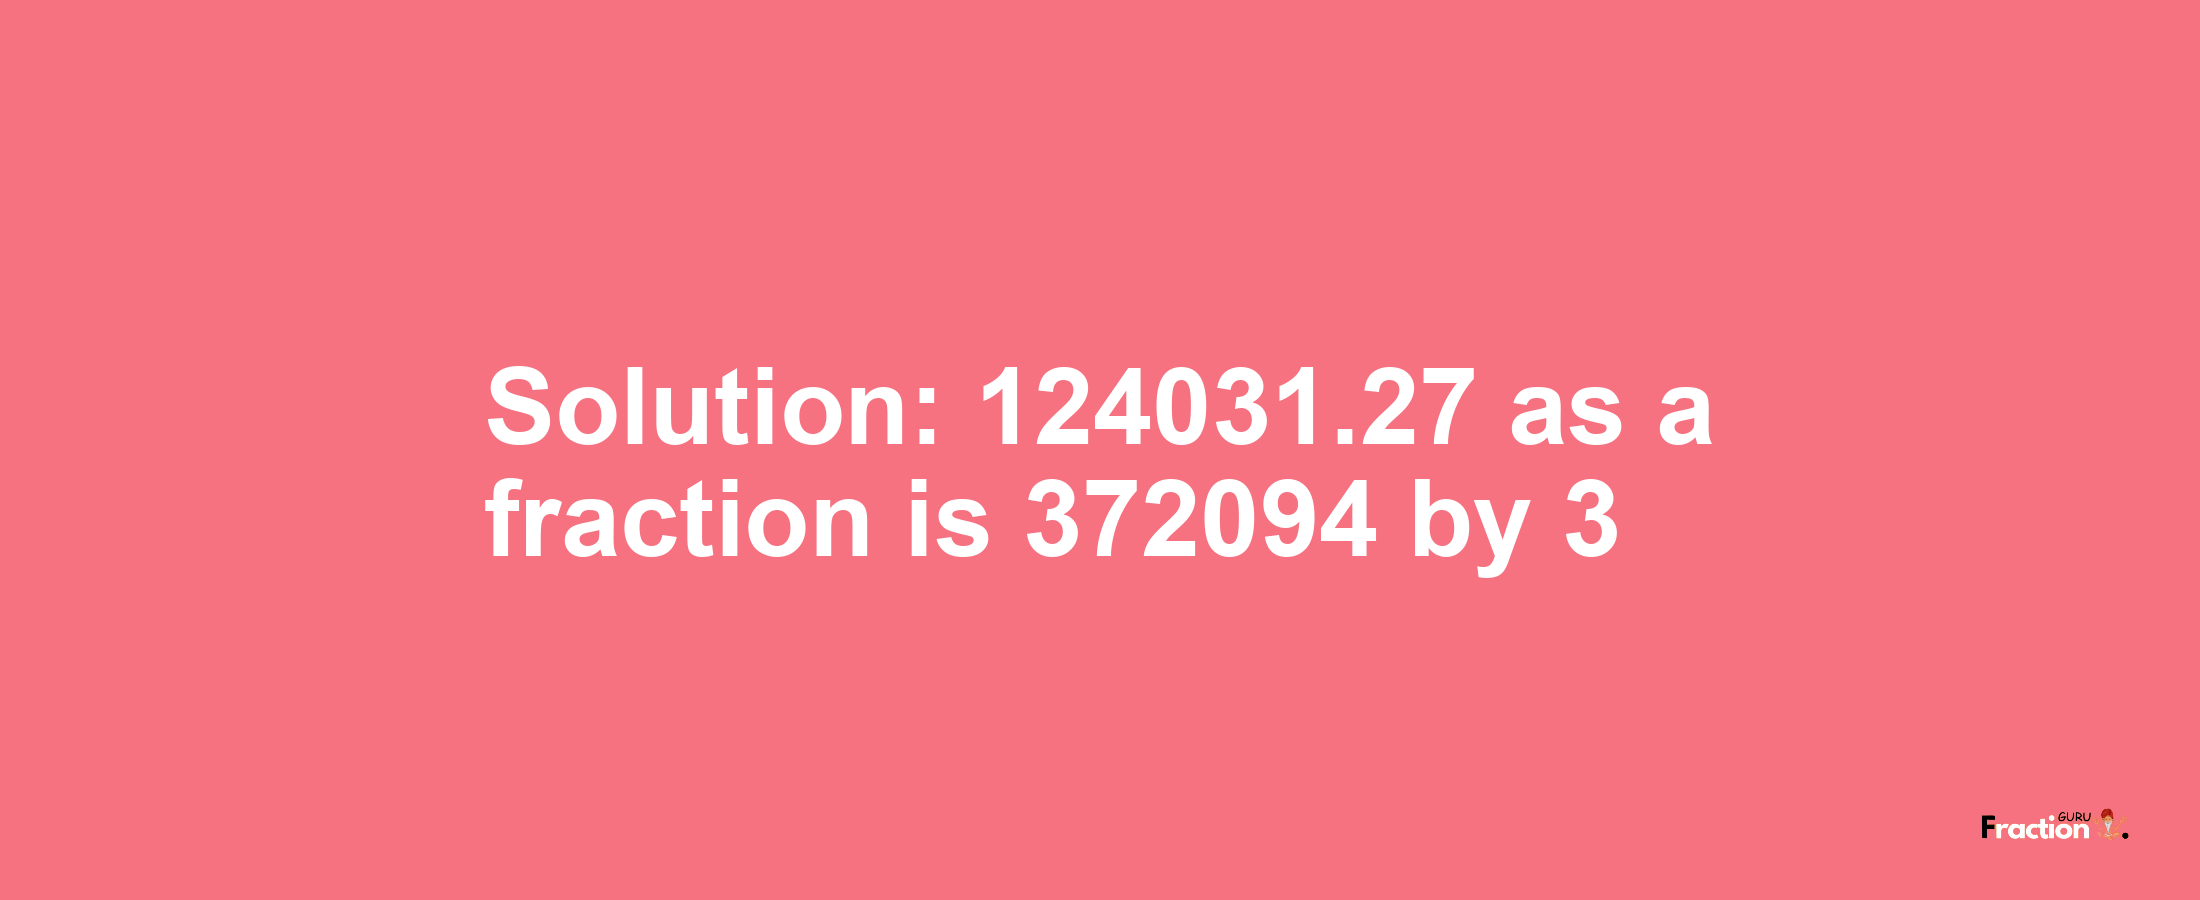 Solution:124031.27 as a fraction is 372094/3